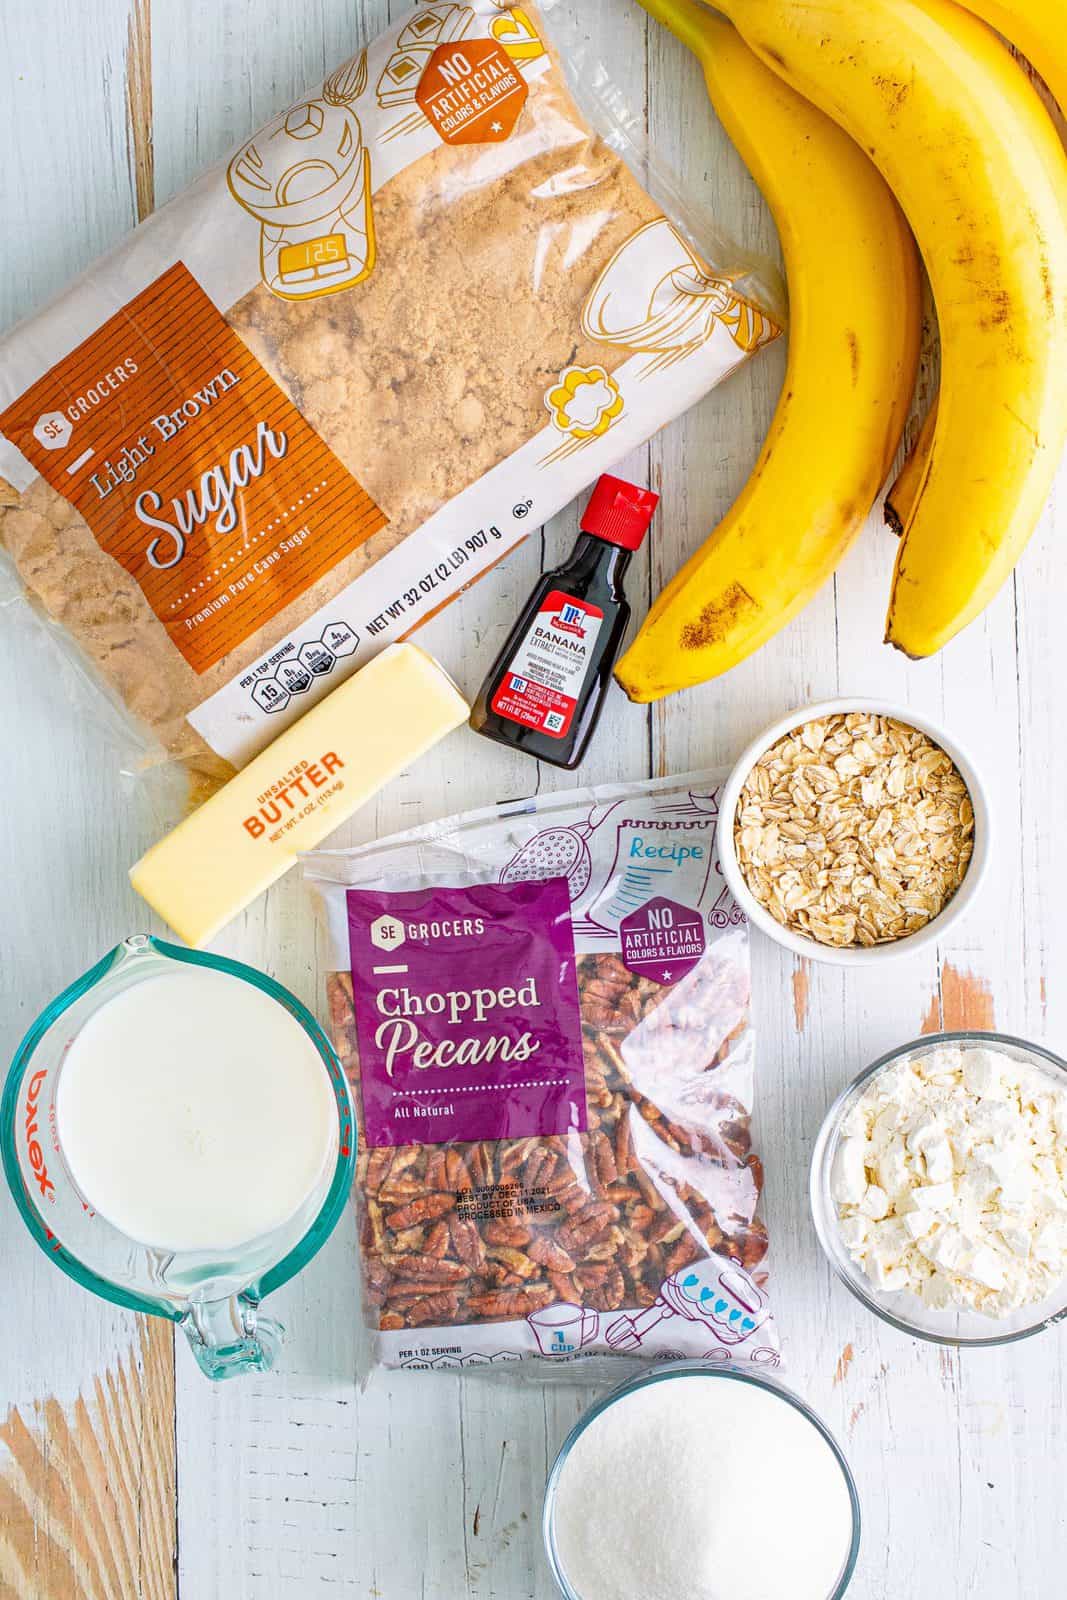 ingredients needed: self-rising flour, unsalted butter, uncooked old-fashioned oats ,chopped pecans, sugar, milk, ripe bananas.